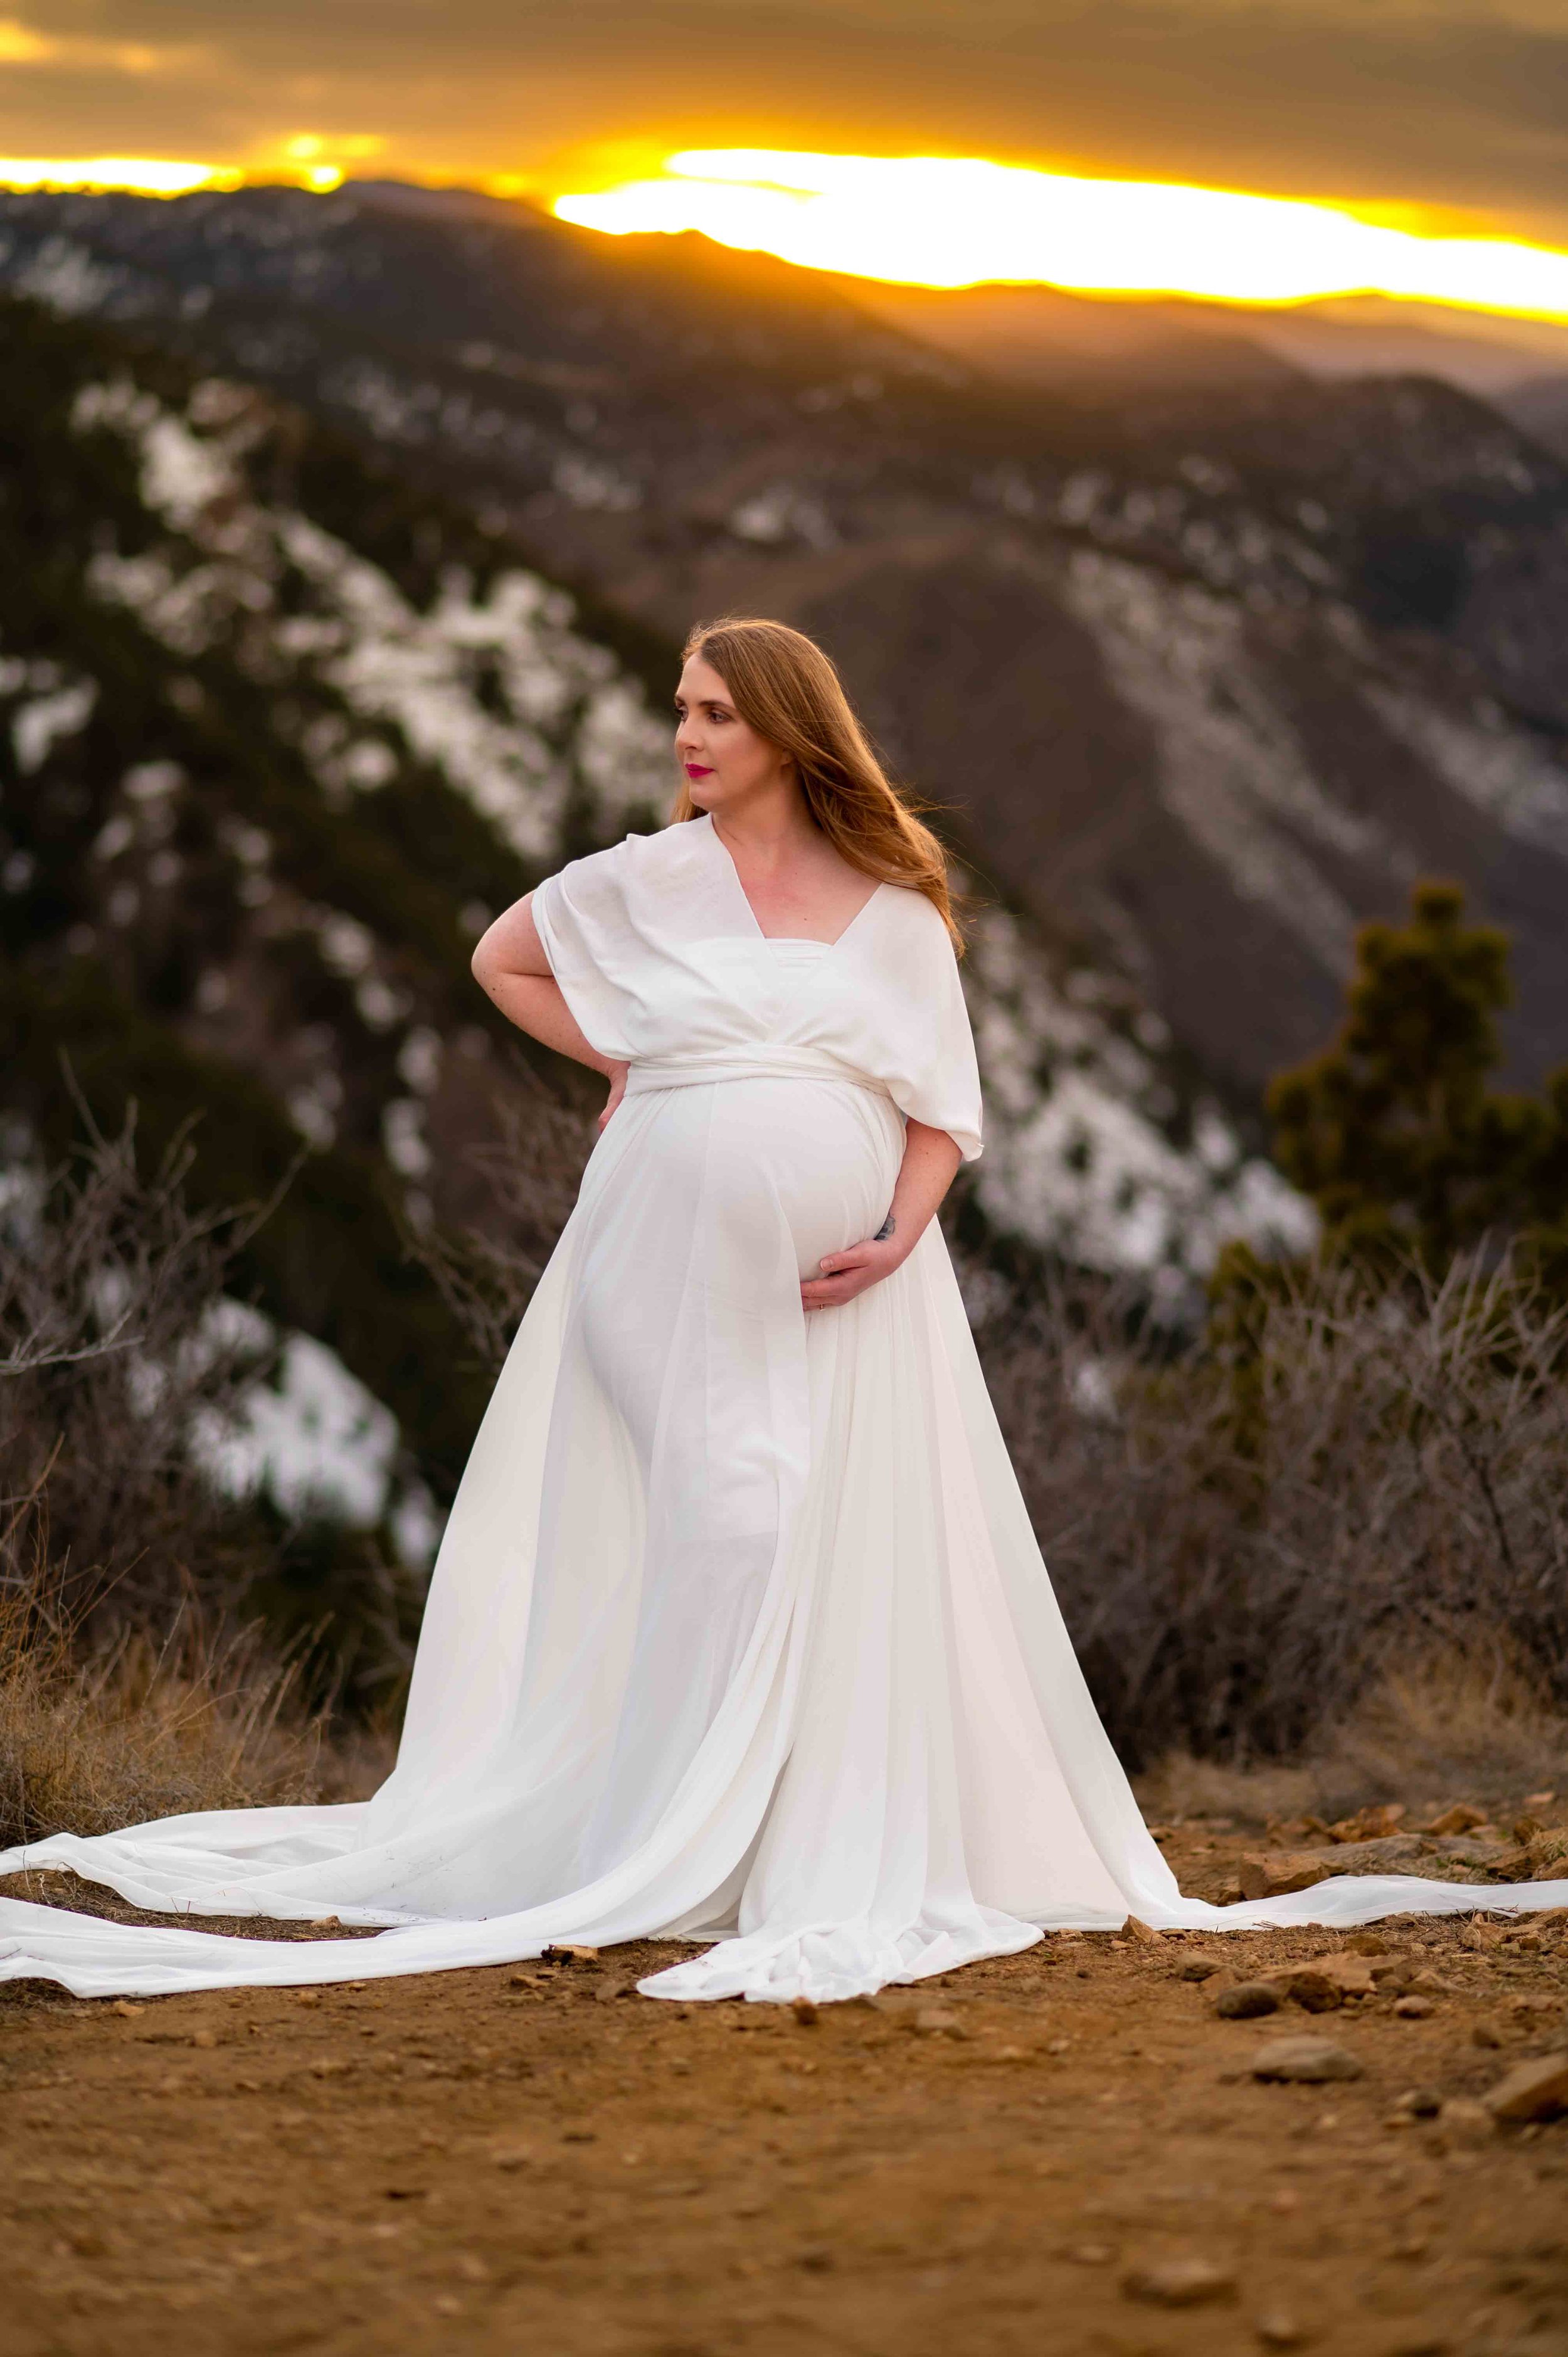 Maternity Photo Gallery - JCPenney Portraits  Pregnancy photoshoot,  Maternity portraits, Maternity photography tips